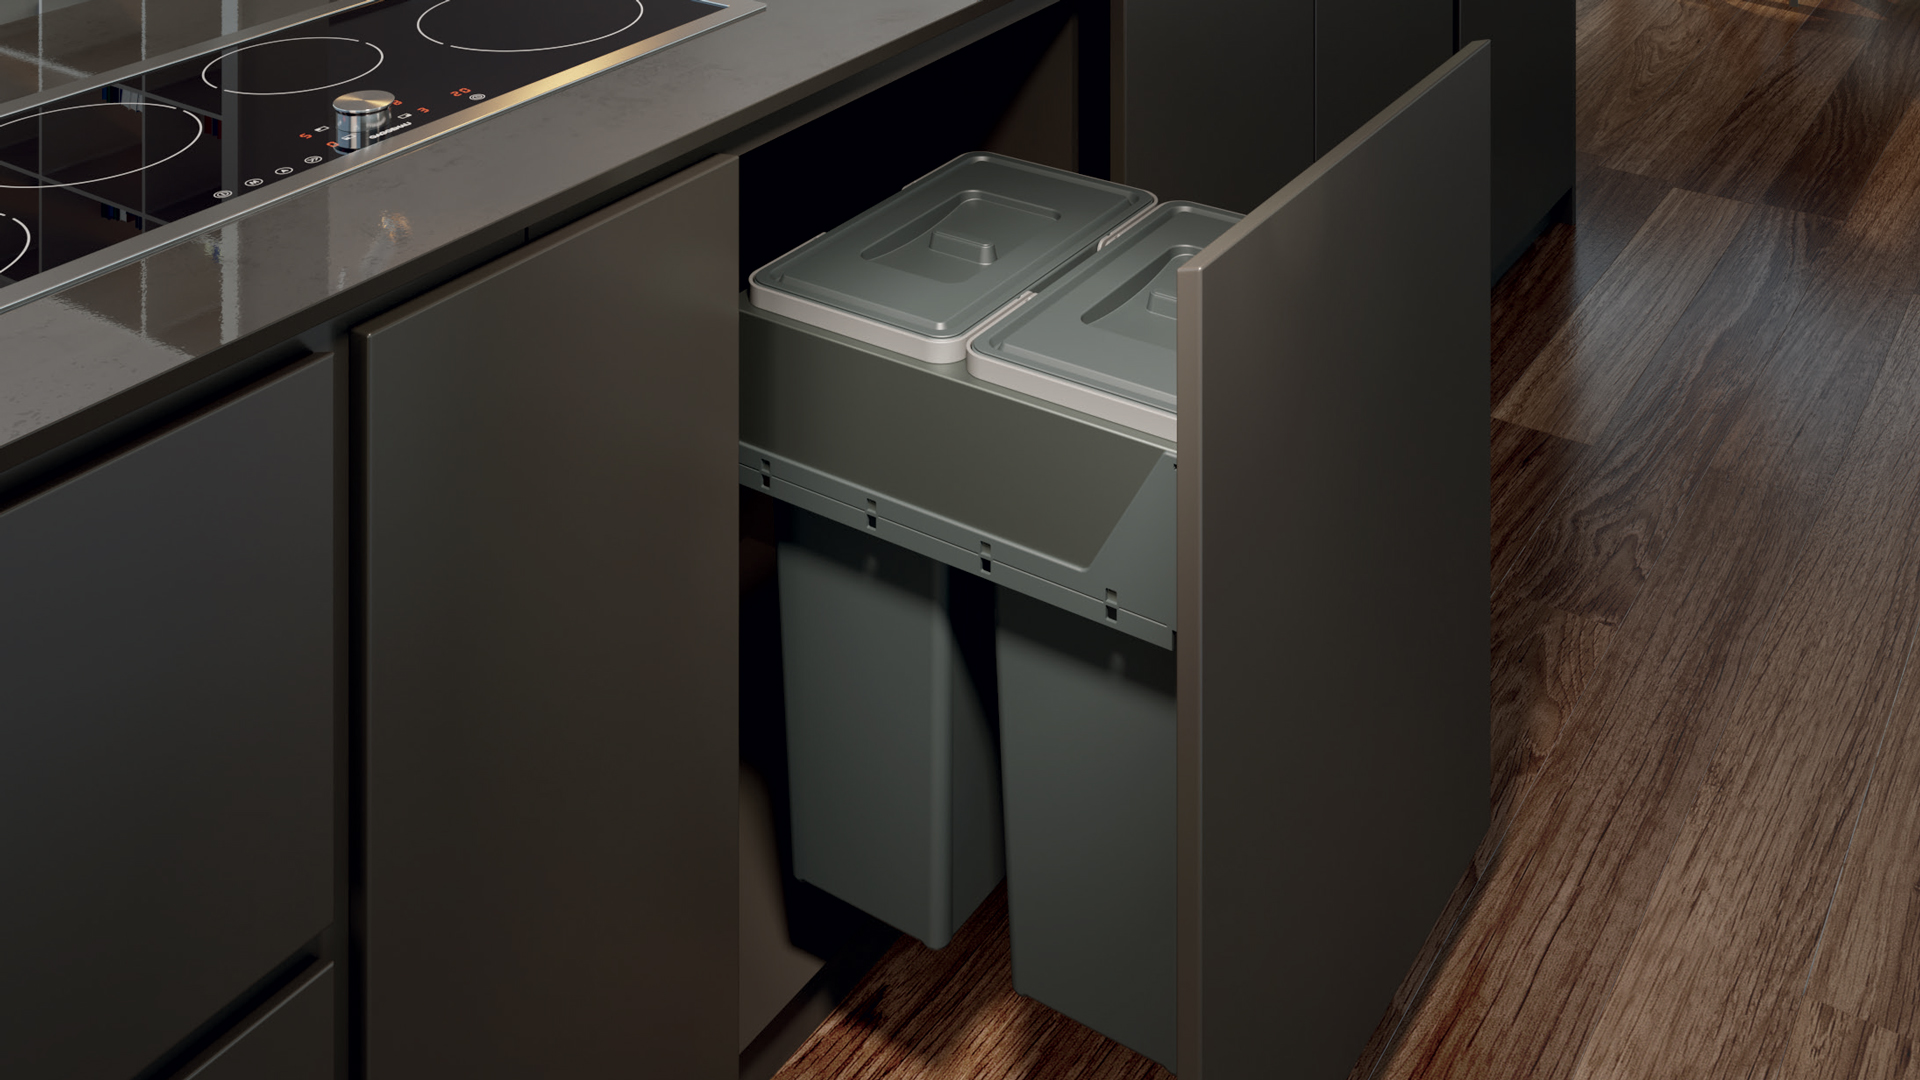 Order and hygiene in the kitchen with the new waste bins